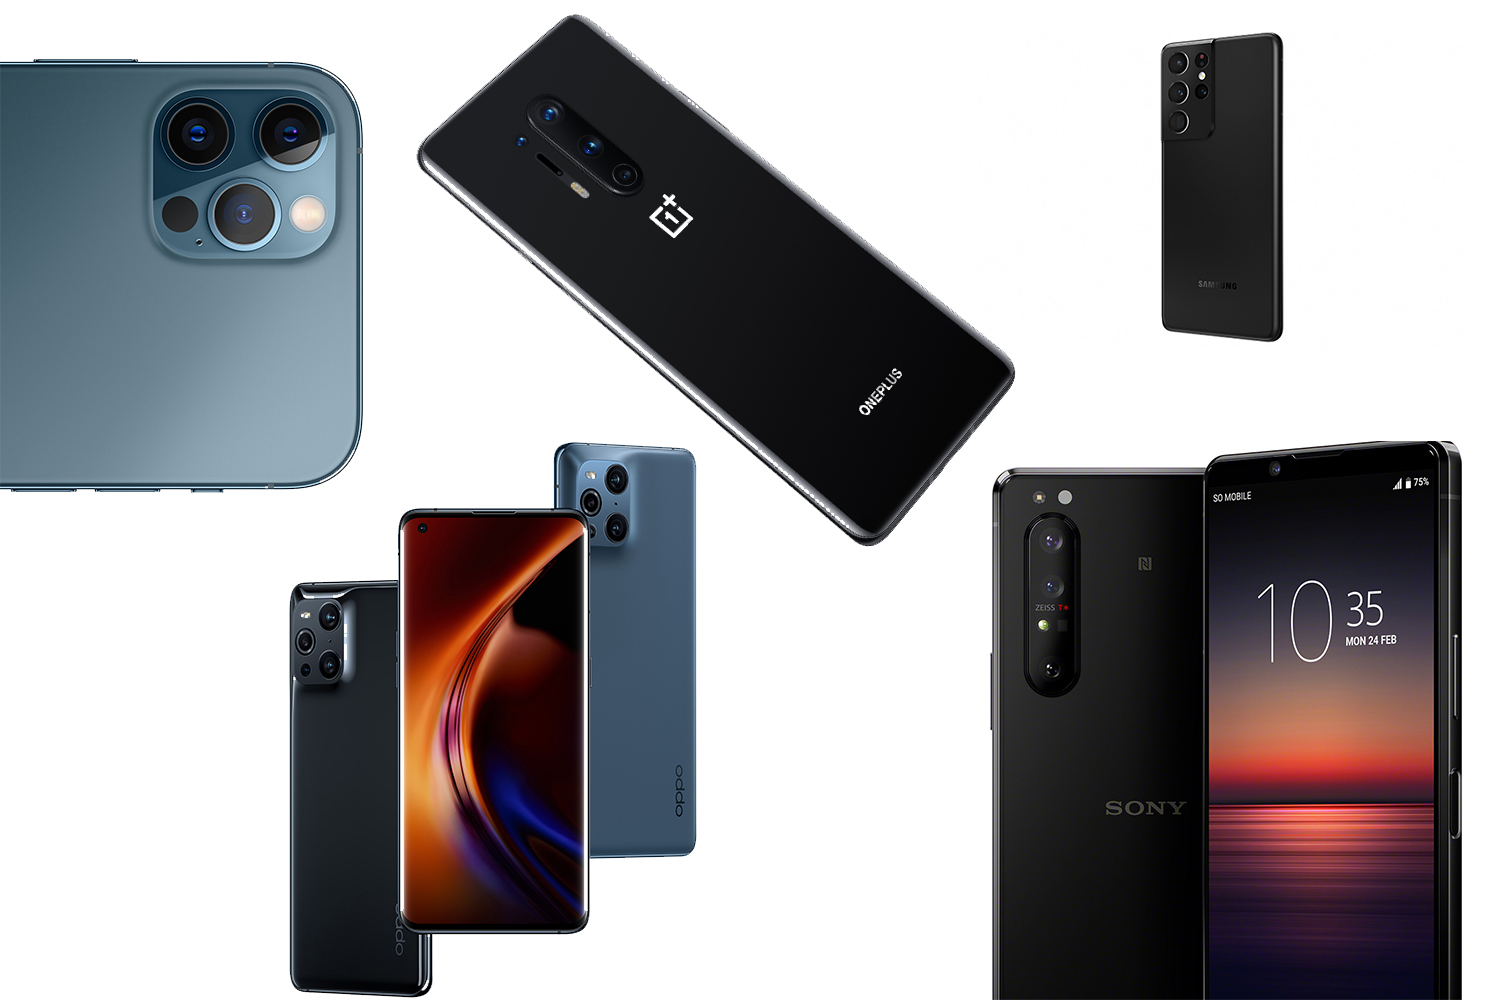 The 10 Best Camera Phones Can Buy in 2022